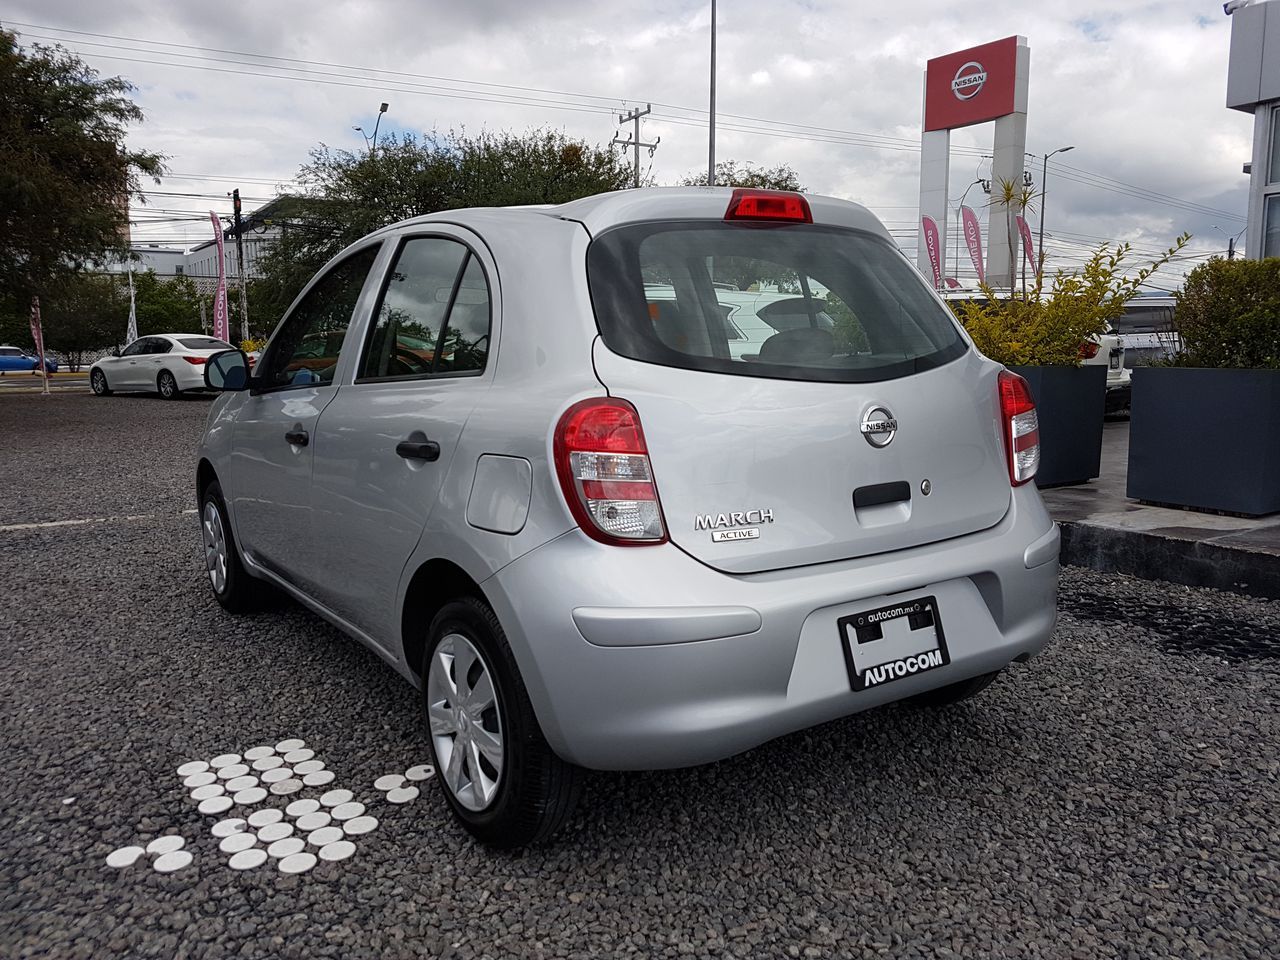 Nissan March 2020